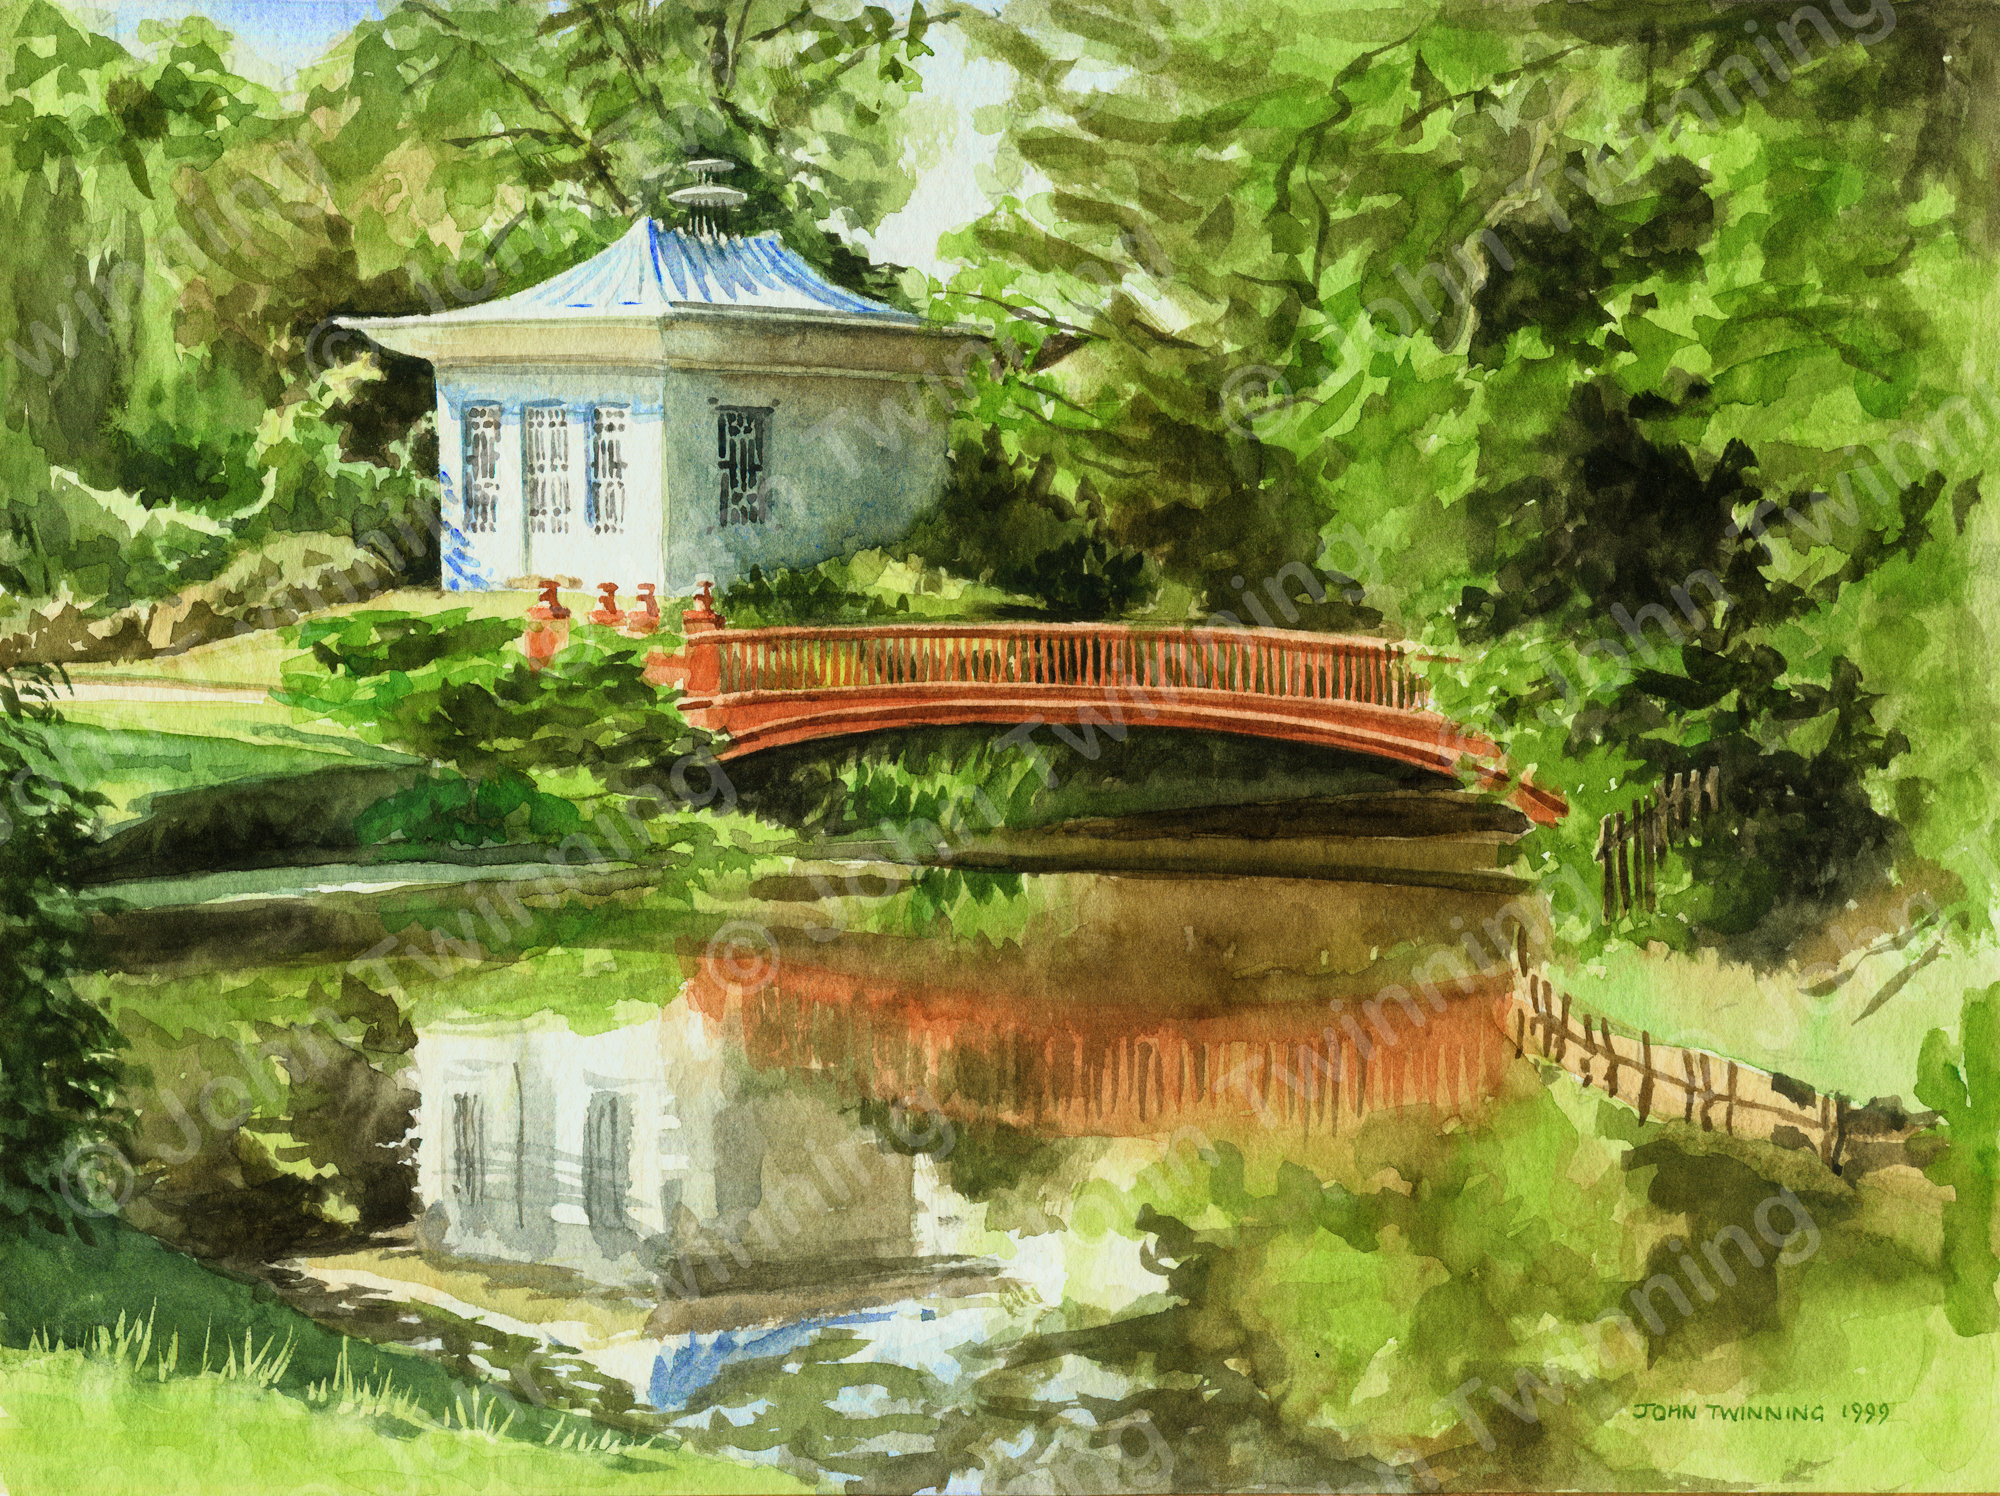 ‘The Chinese House, Shugborough Hall, Staffordshire’ – art print from a watercolour painting of this building reflected in water